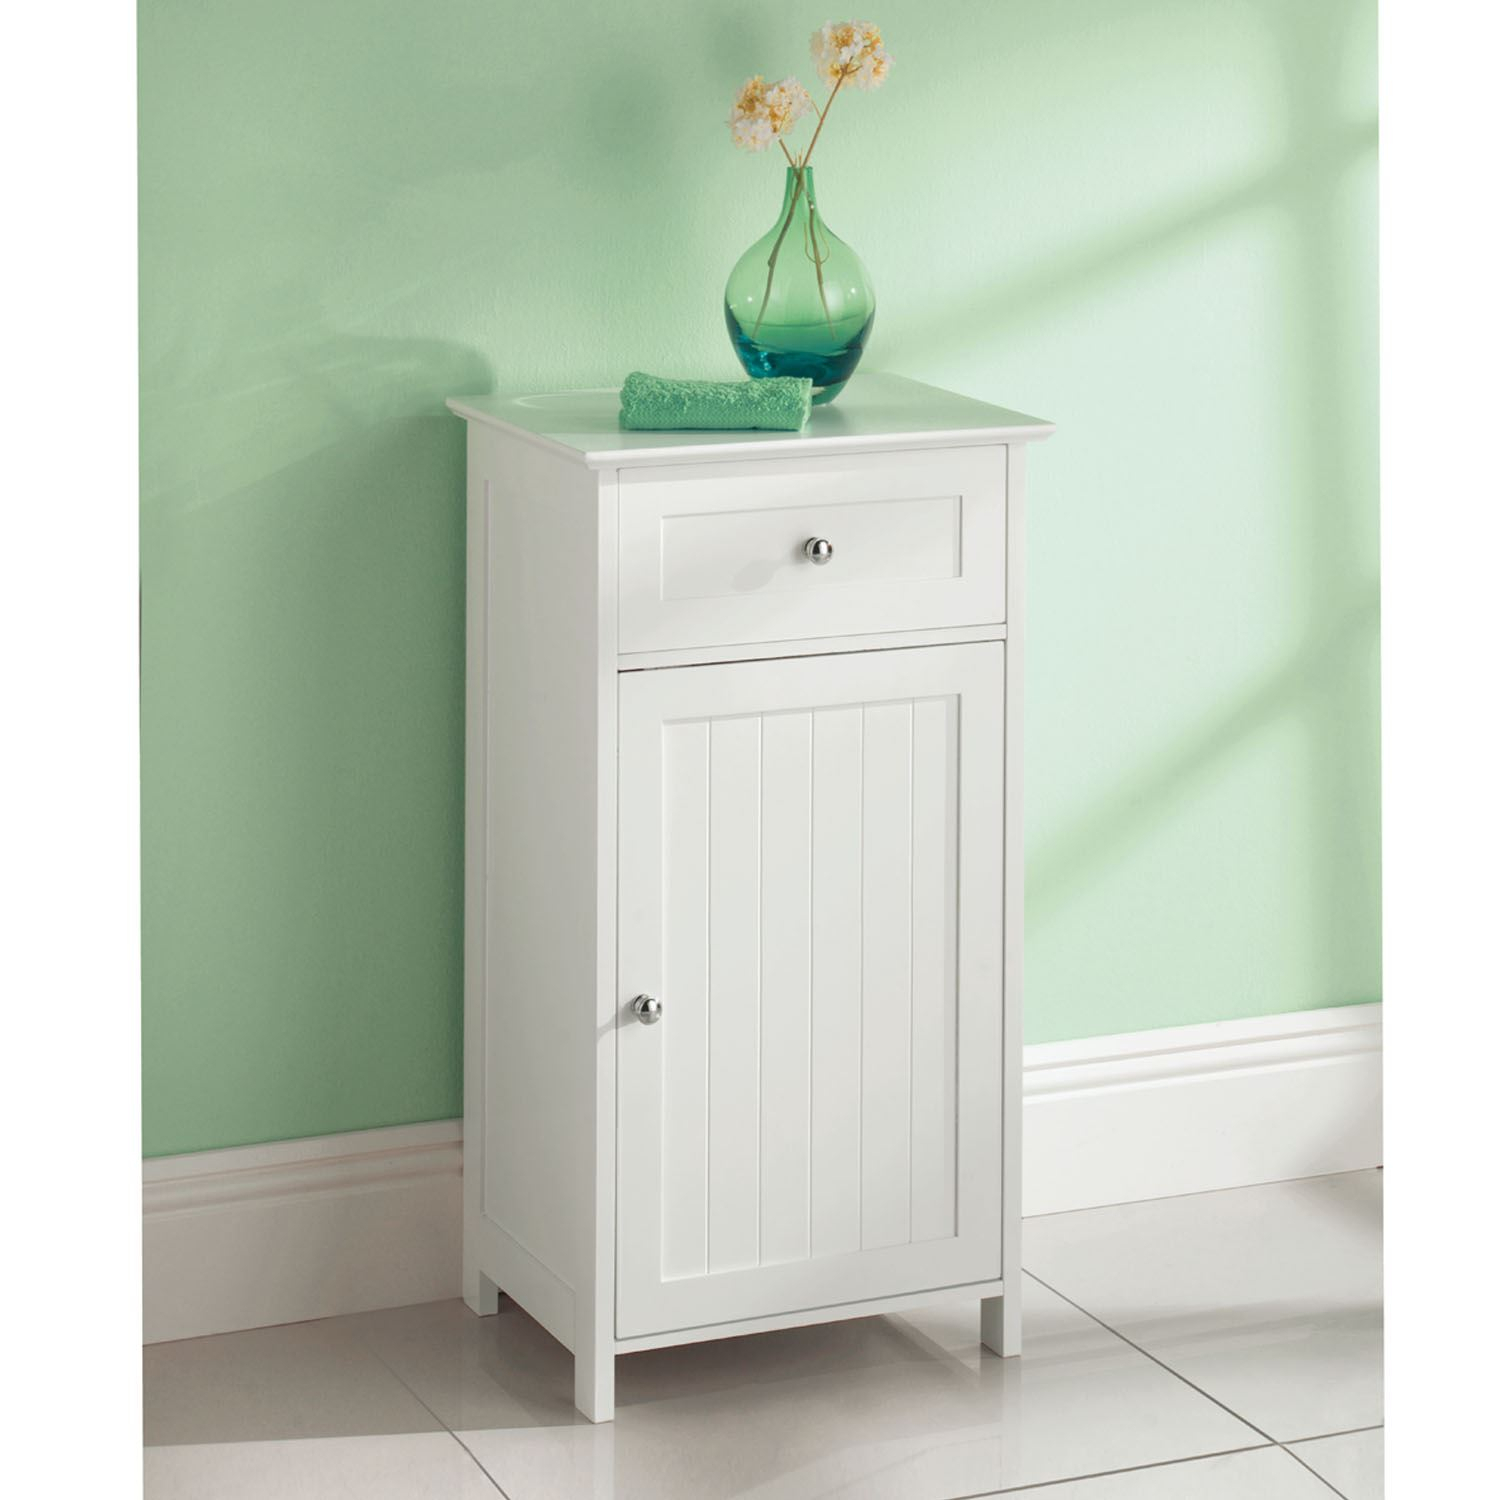 Freestanding Bathroom Cabinet White Cabinet Ideas intended for dimensions 1500 X 1500